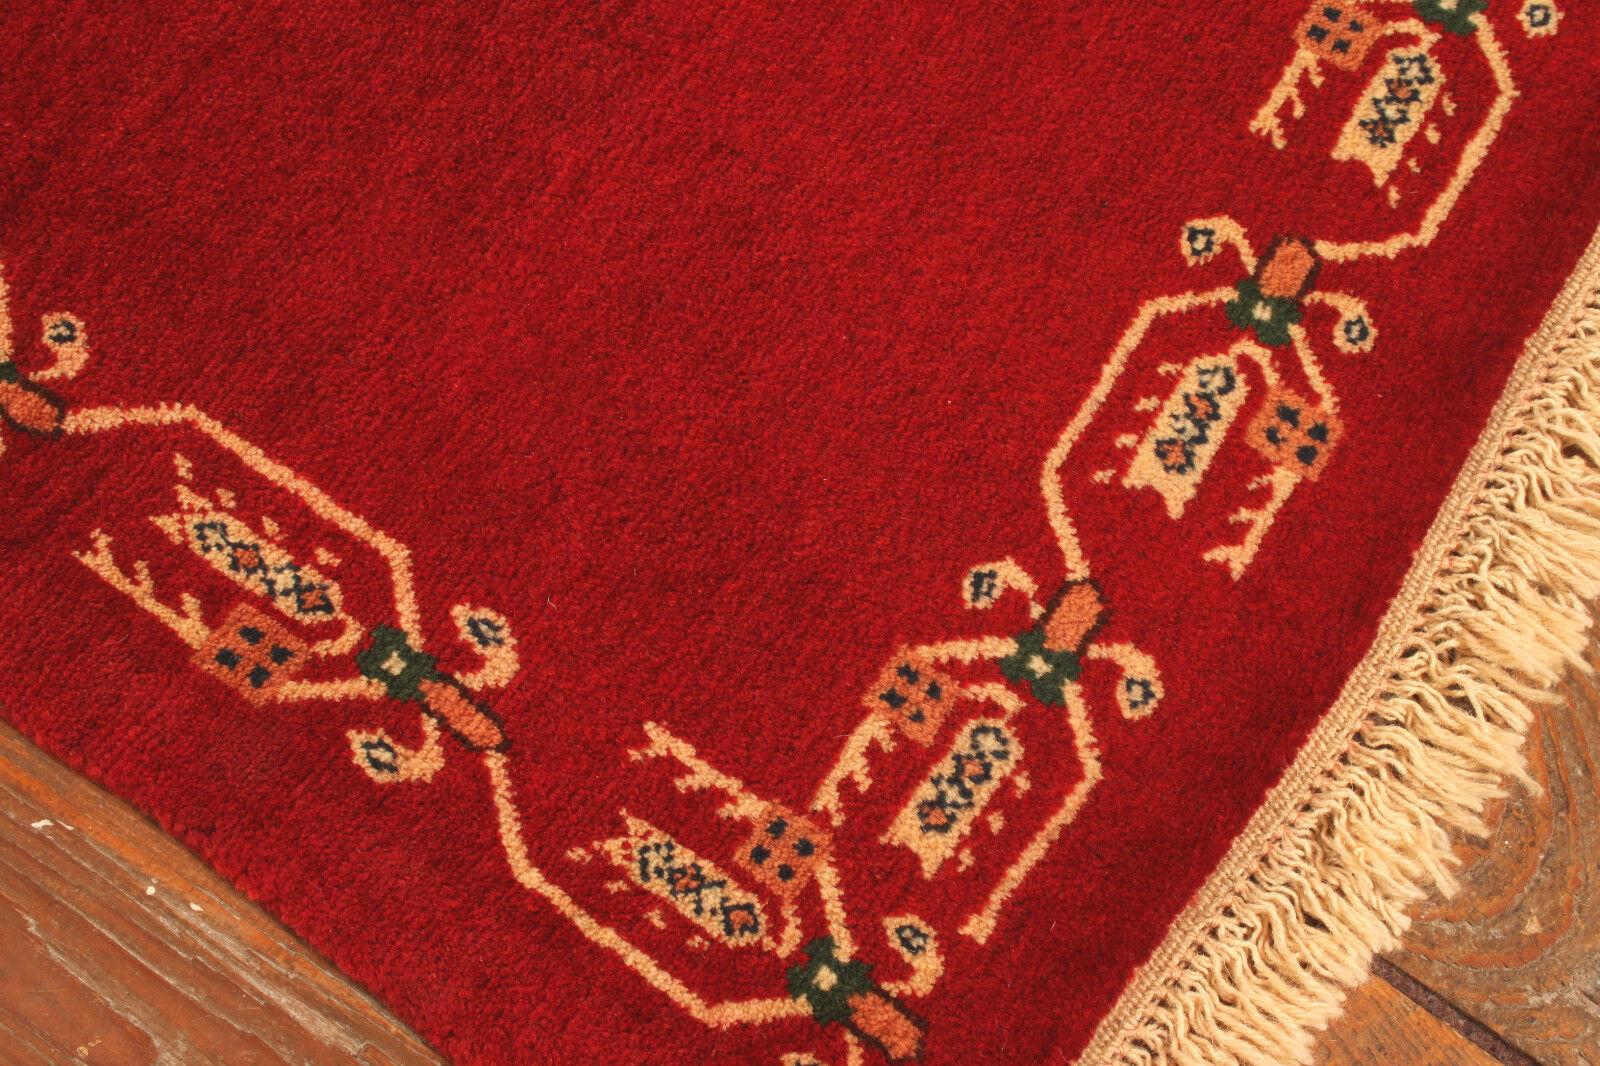 Handmade Vintage Persian Yalameh Rug 3.3' x 5.1', 1970s - 1T31 In Good Condition For Sale In Bordeaux, FR